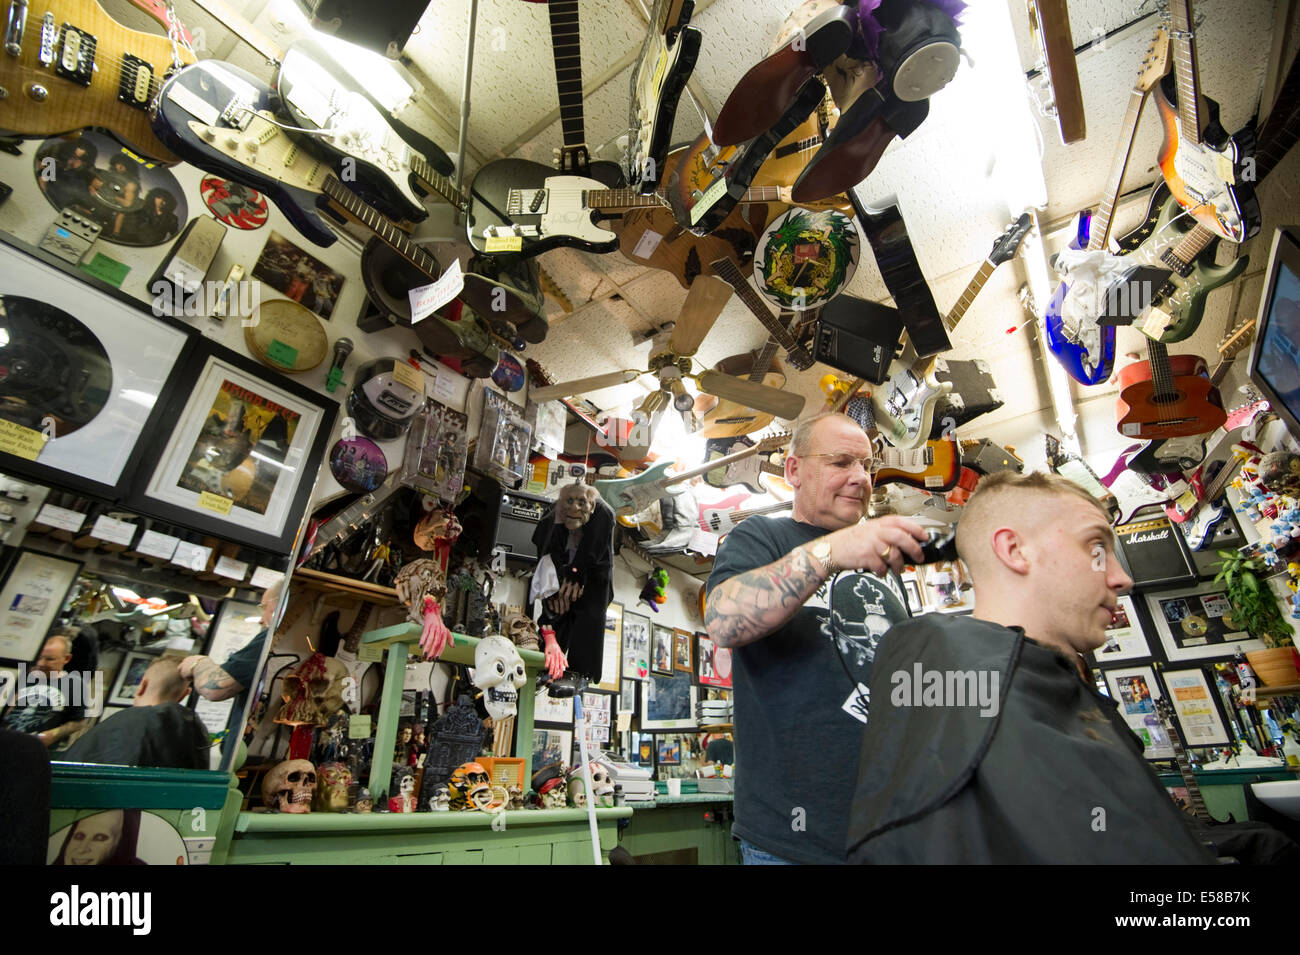 .Beards 'n' Barnets Barbershop. 53 yr old Geoff Cole a rock nut who has turned his barbershop into a rock music mecca Stock Photo